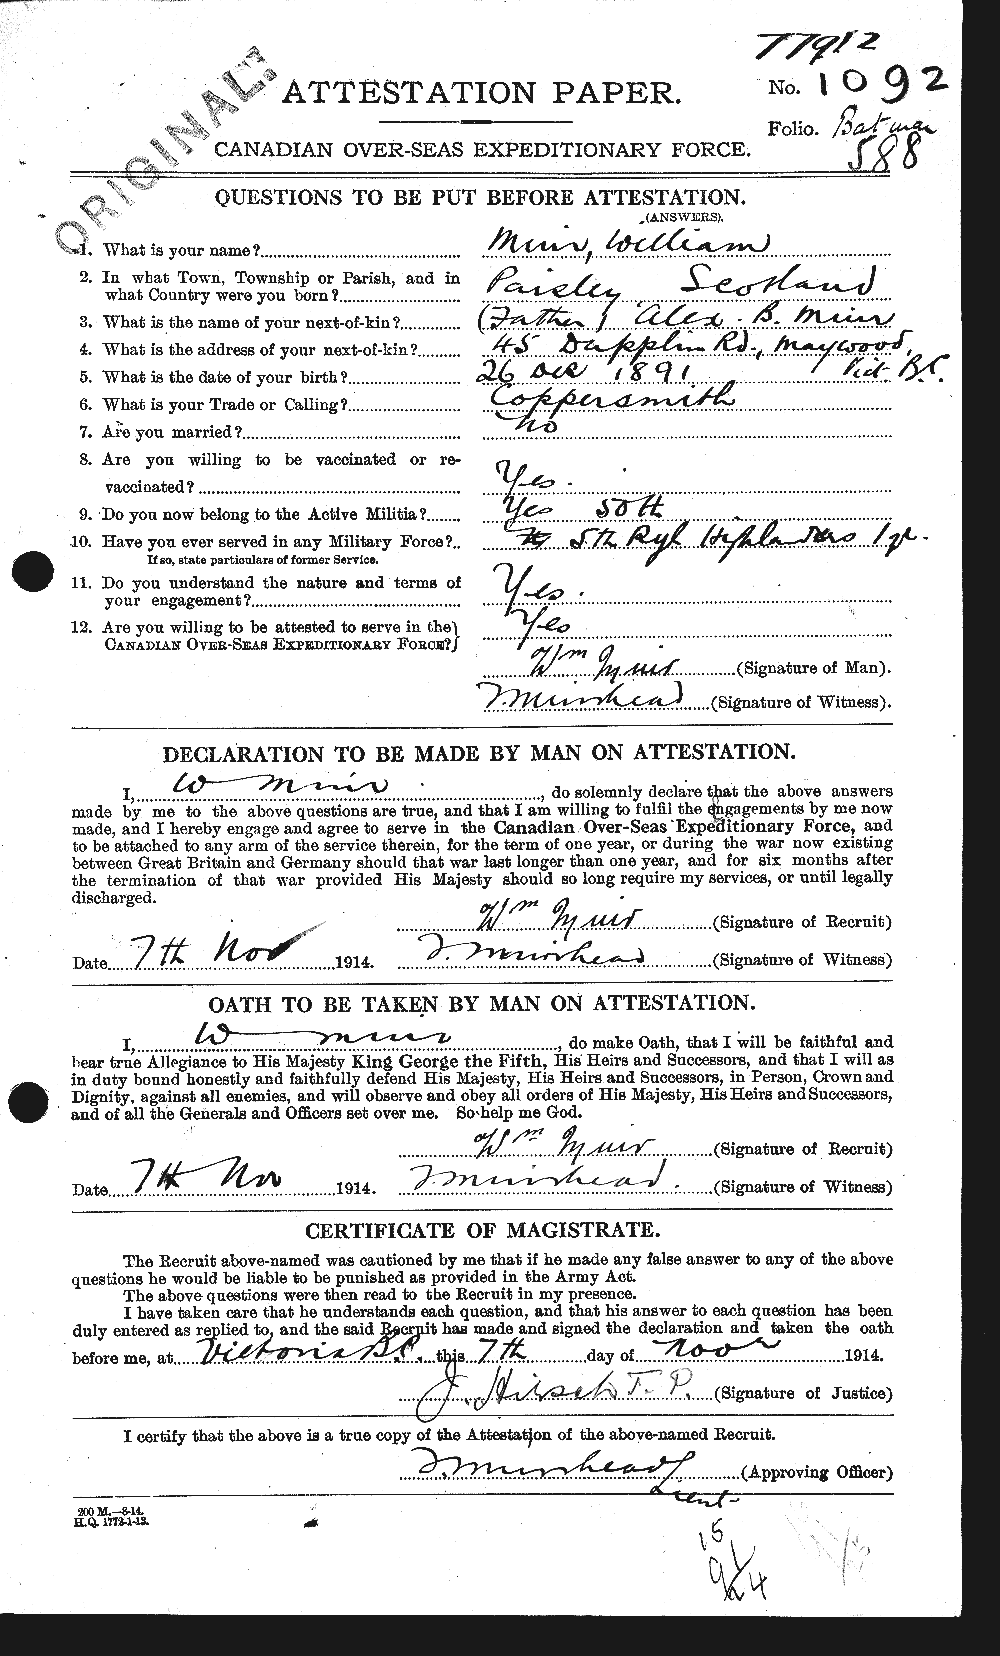 Personnel Records of the First World War - CEF 509700a